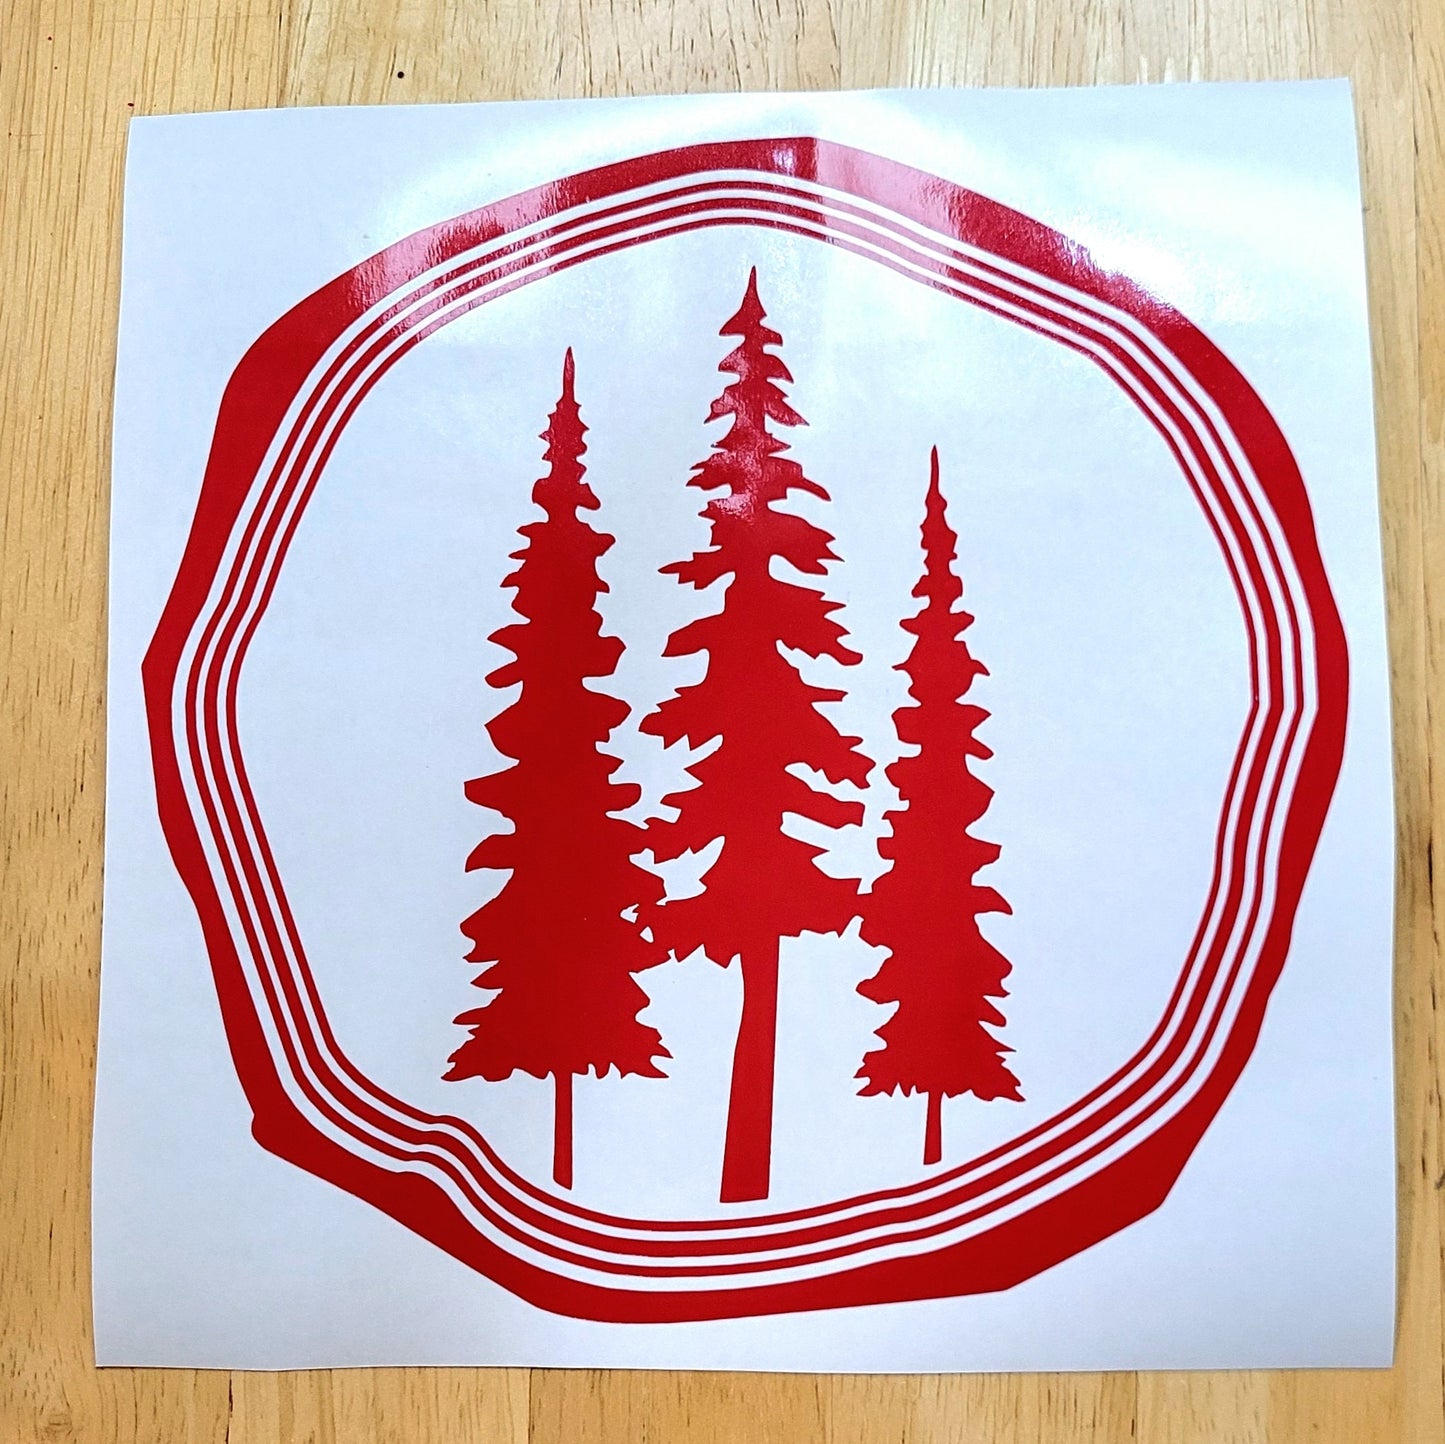 Trees Forest Vinyl Transfer Decal Sticker for Car, Truck, Camper, RV, Van, window, laptop, cup. Multiple Colors offered and large sizes.